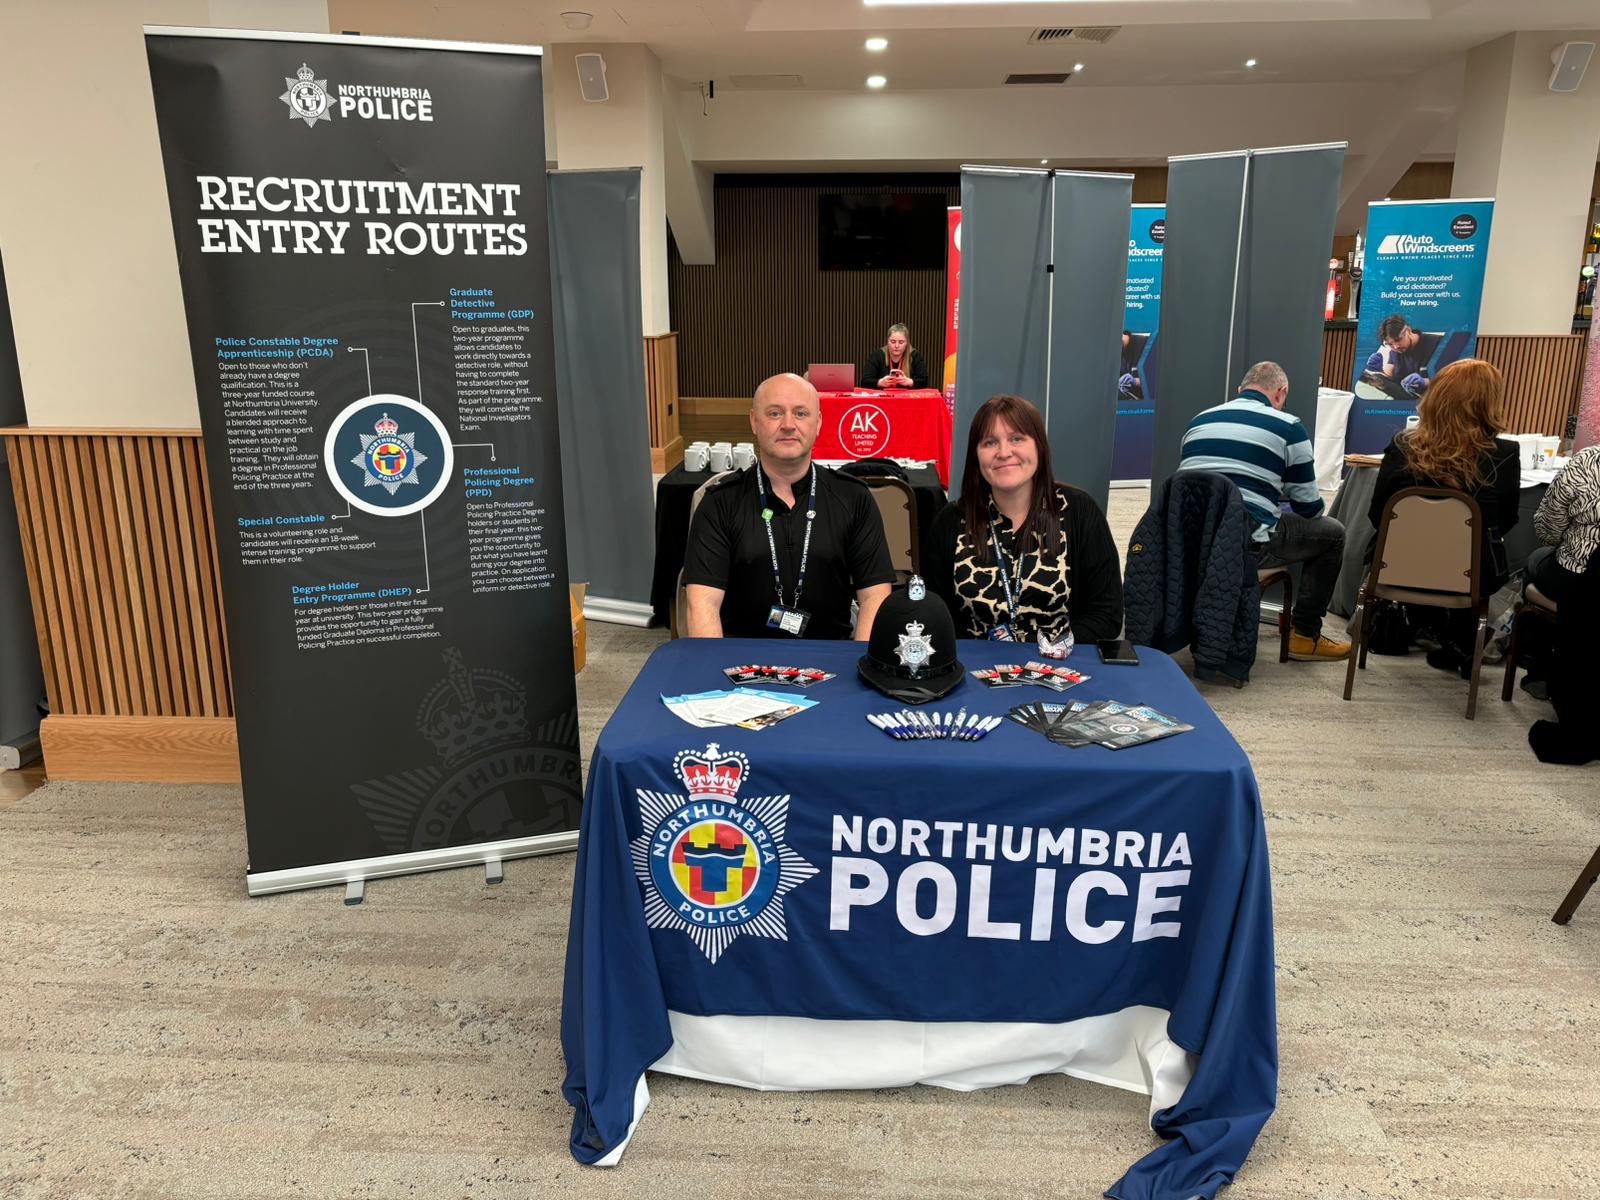 Northumbria Police at our event in Sunderland